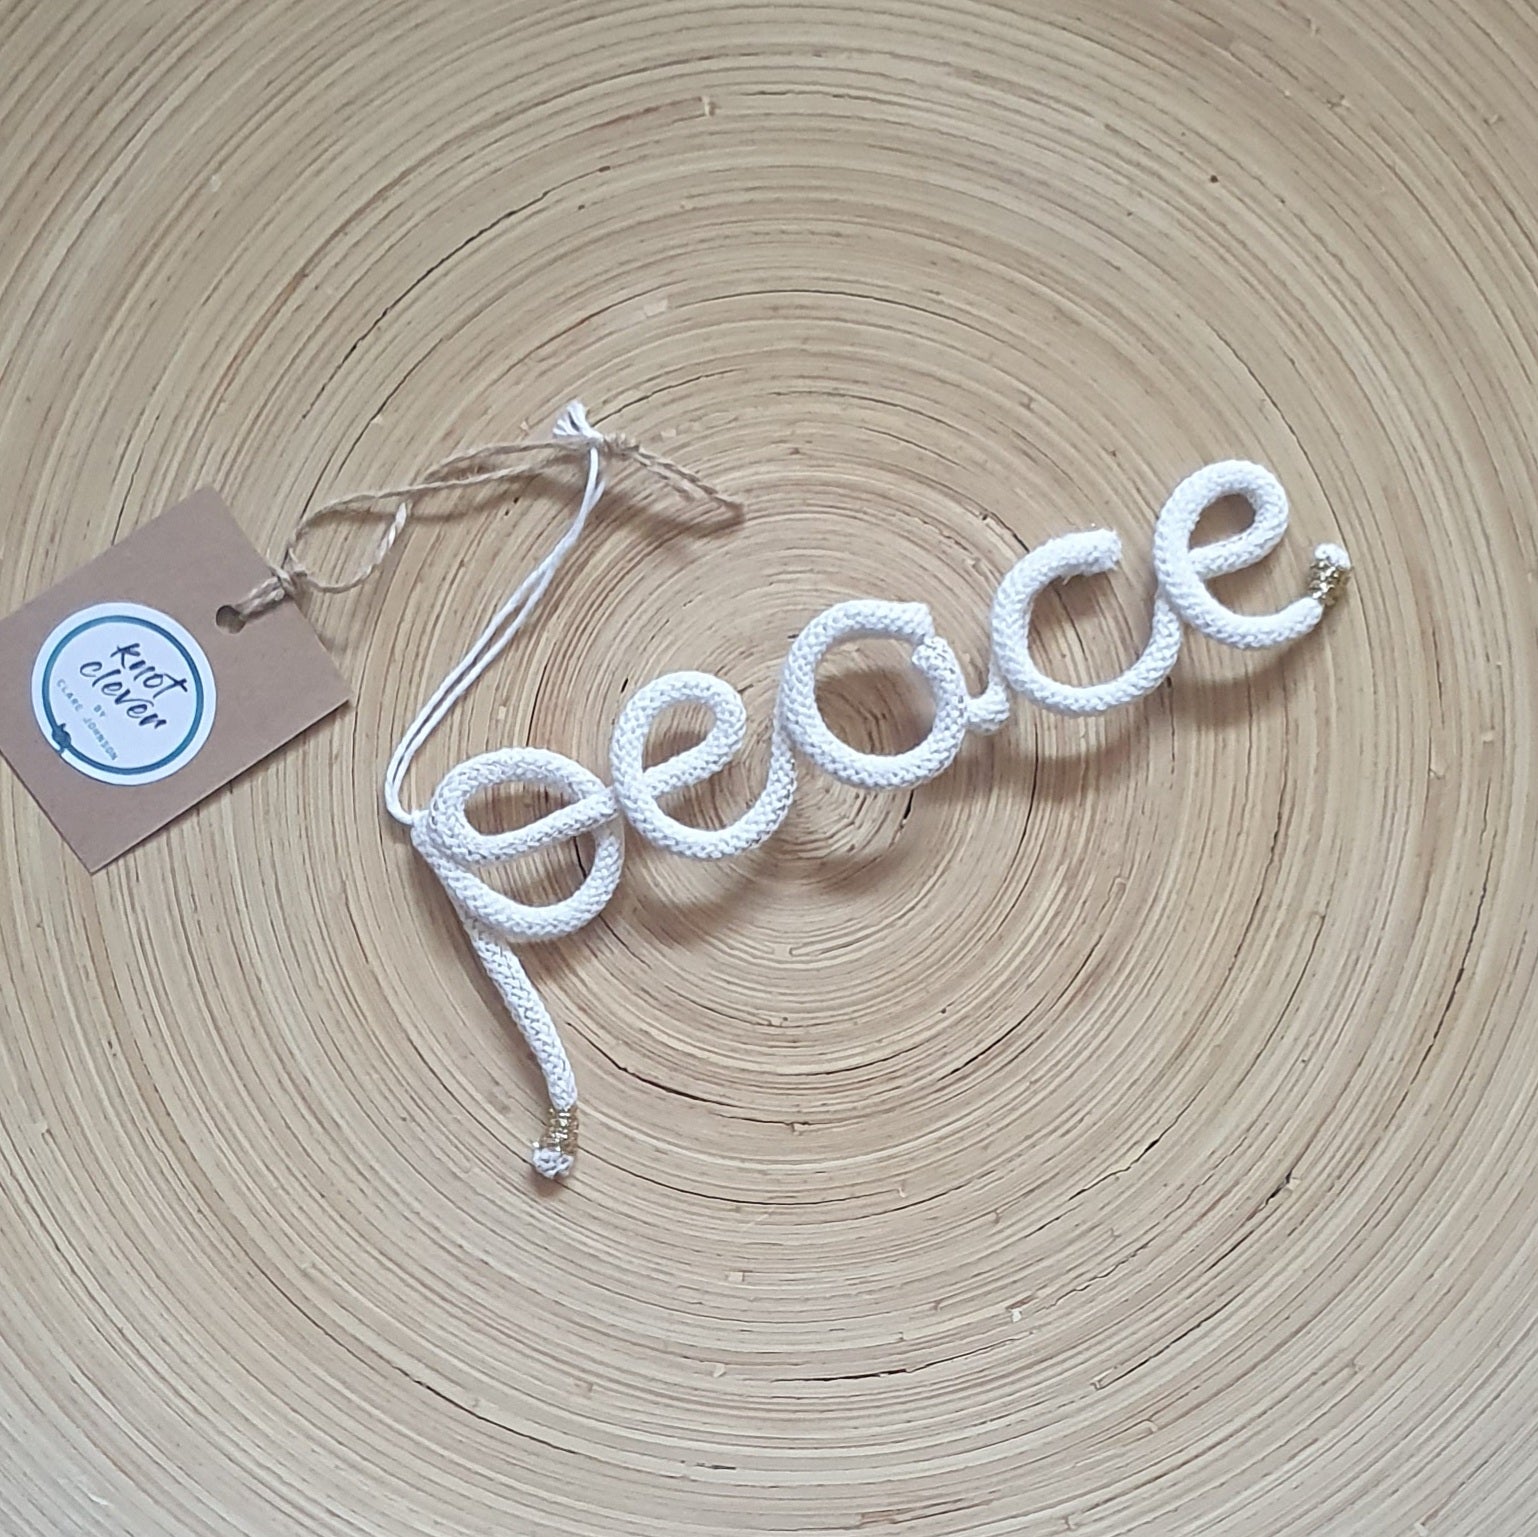 Handmade Cotton and Wire Word - peace